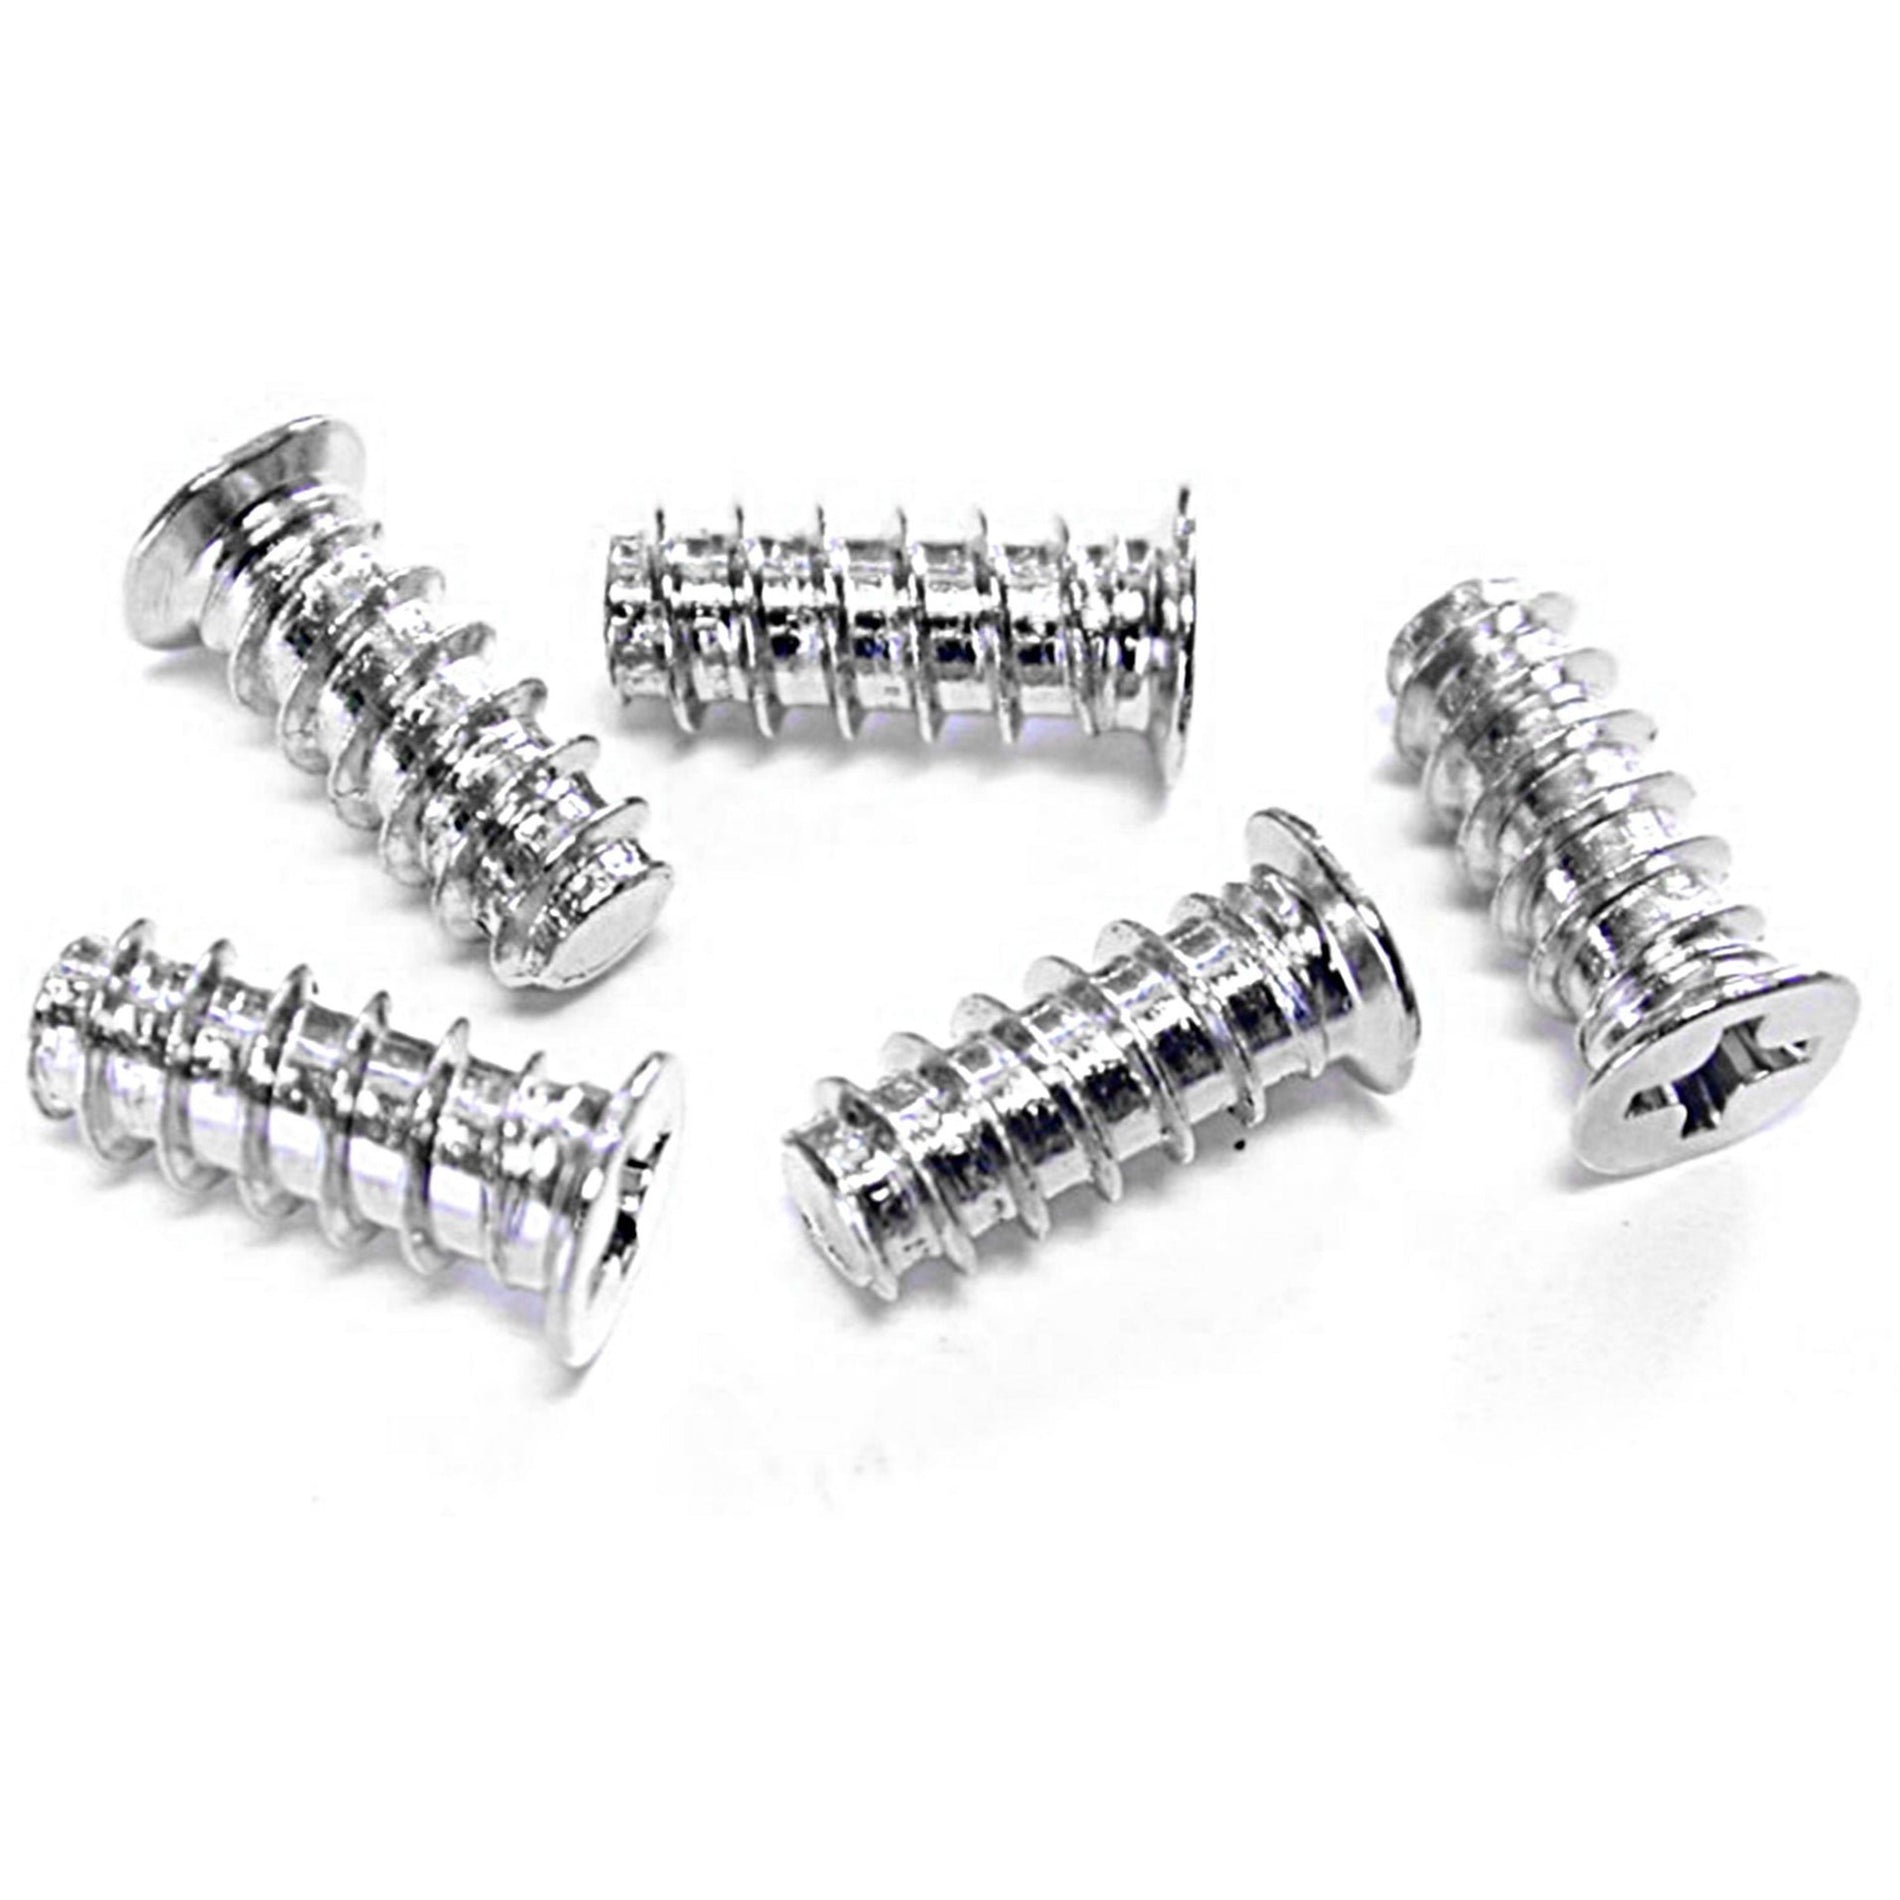 StarTech.com fanscrew Mounting PC Case Fan Screws - 50 Pack, for Installing Plastic-Framed Cooling Fans to PC Chassis